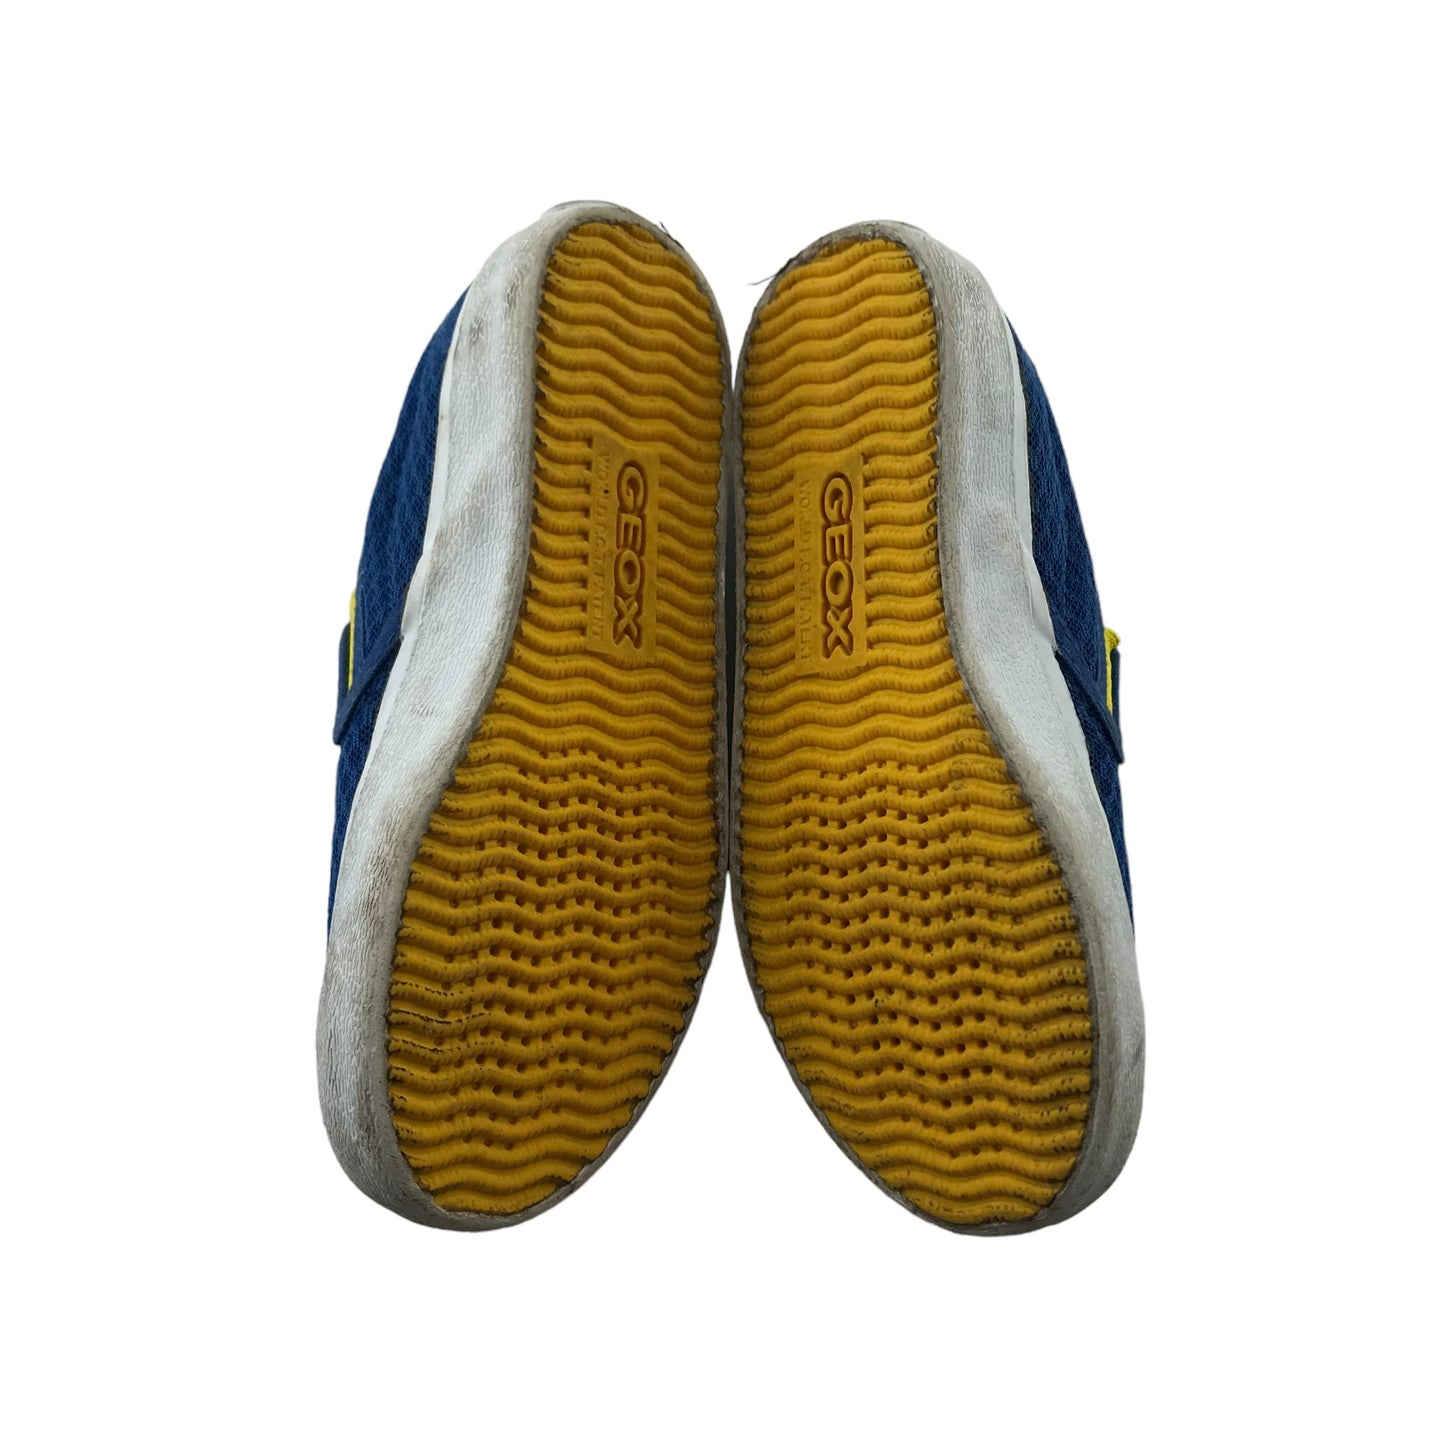 Geox Plimsolls Shoe Size 11.5 Junior Royal Blue with Yellow Detailing